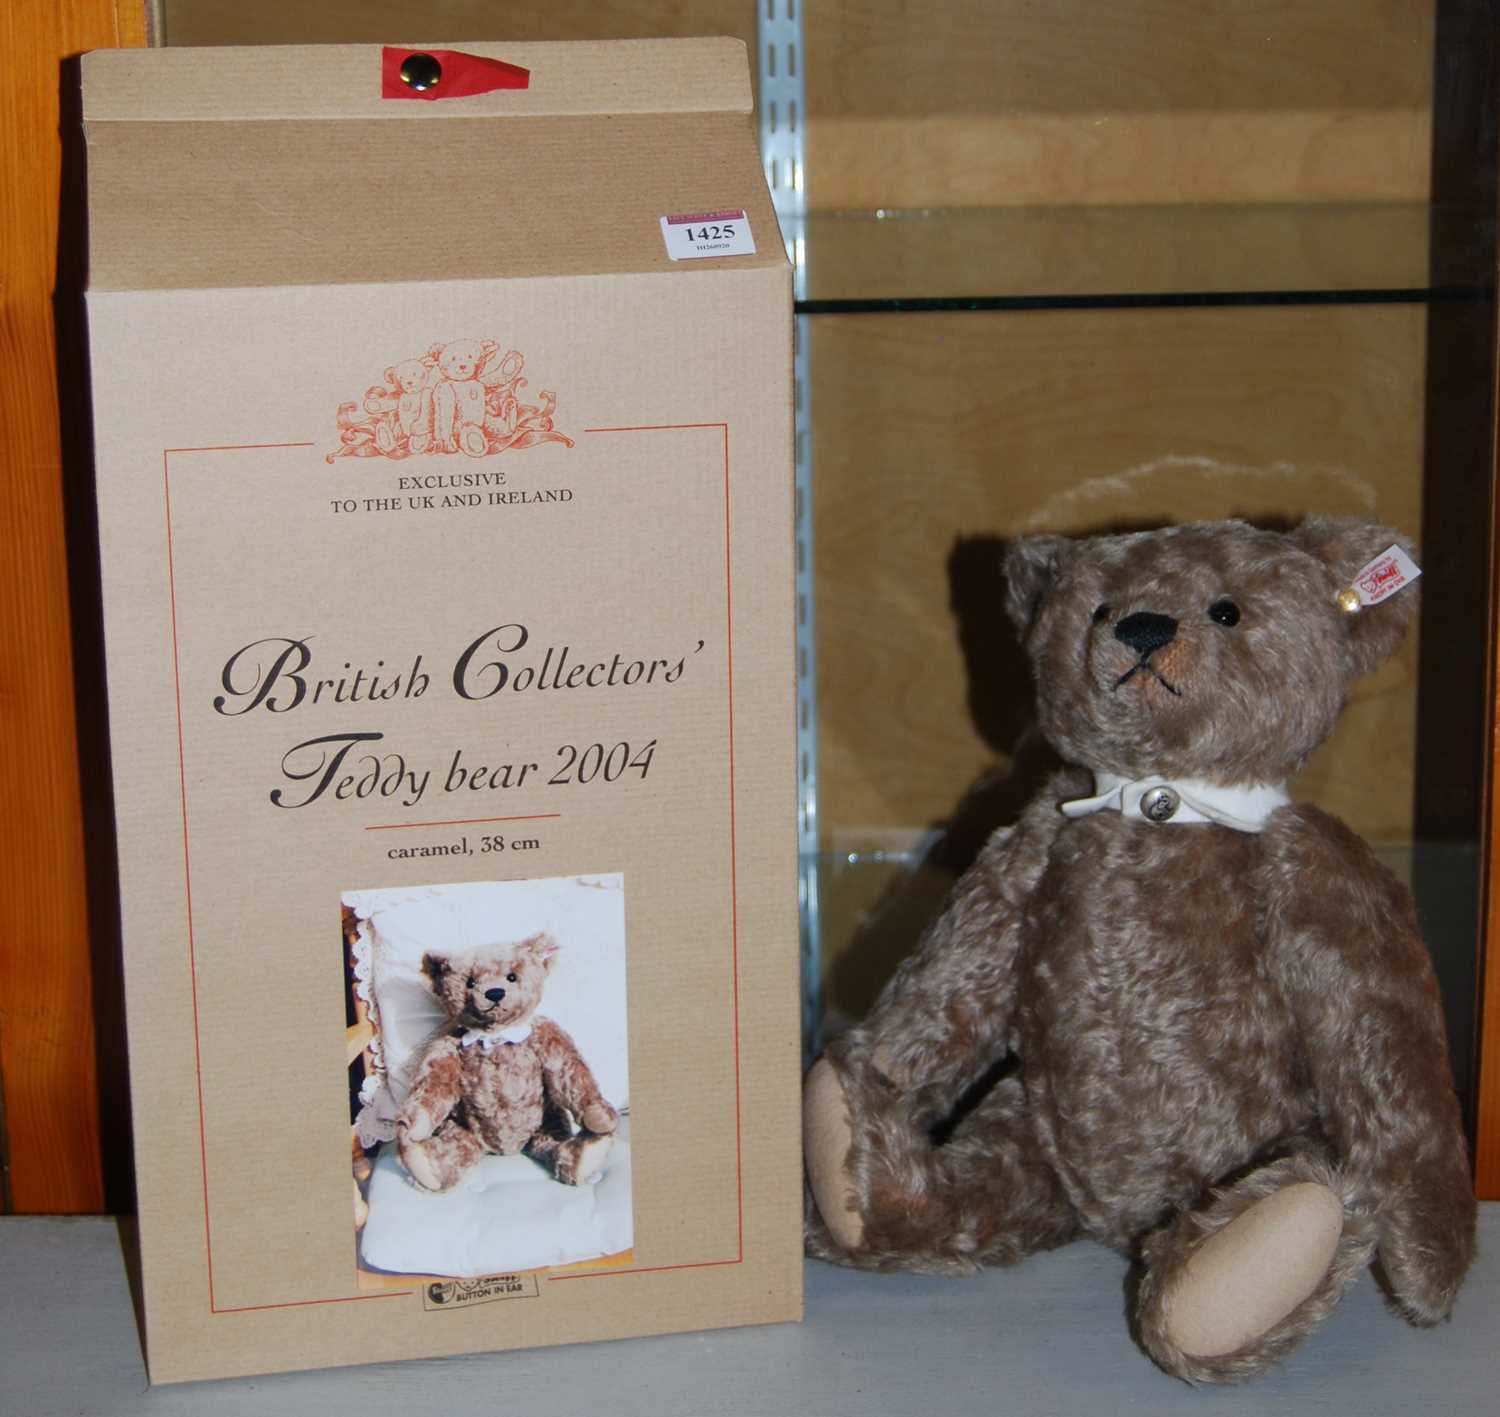 A boxed Steiff 'as-new' British Collectors teddy-bear, 2004, serial number 661372, with white tag in